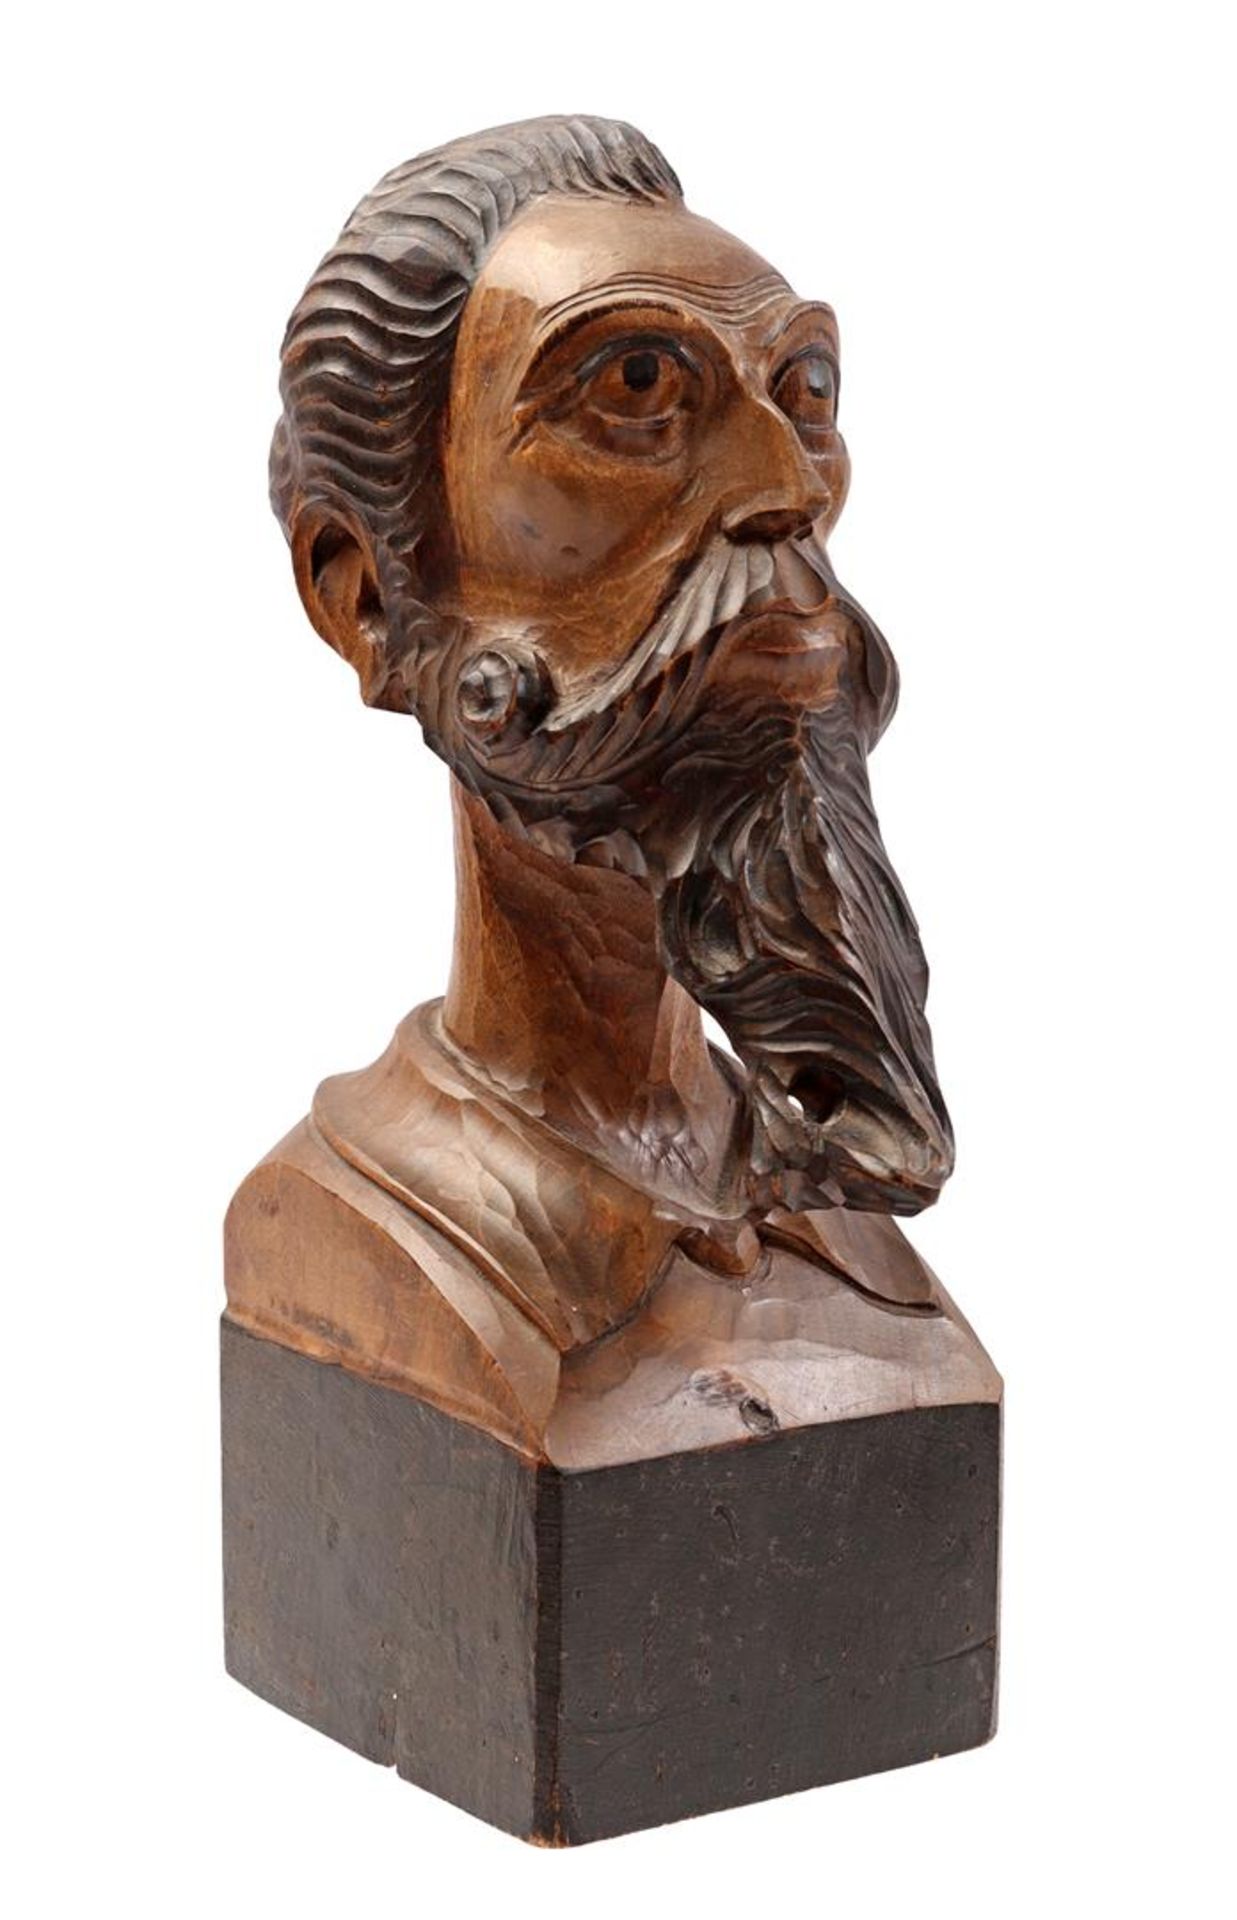 Wooden bust of Don Quichotte